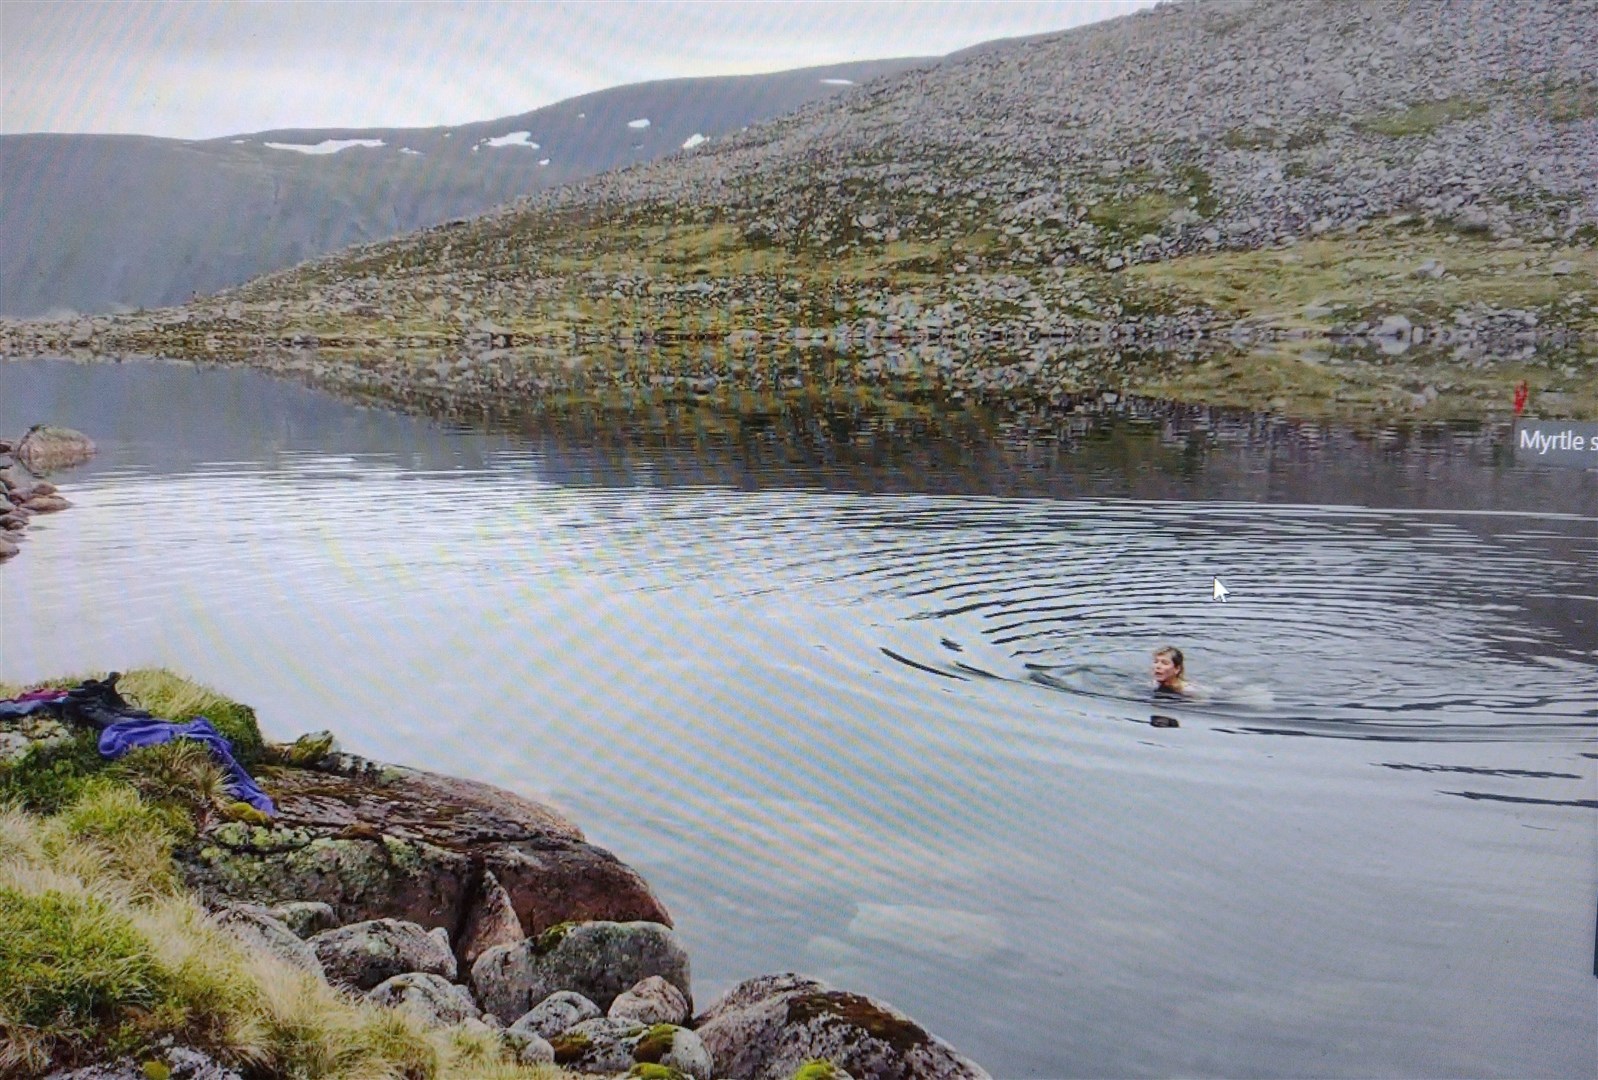 The author cools the hidden fires in an icy tarn during her research